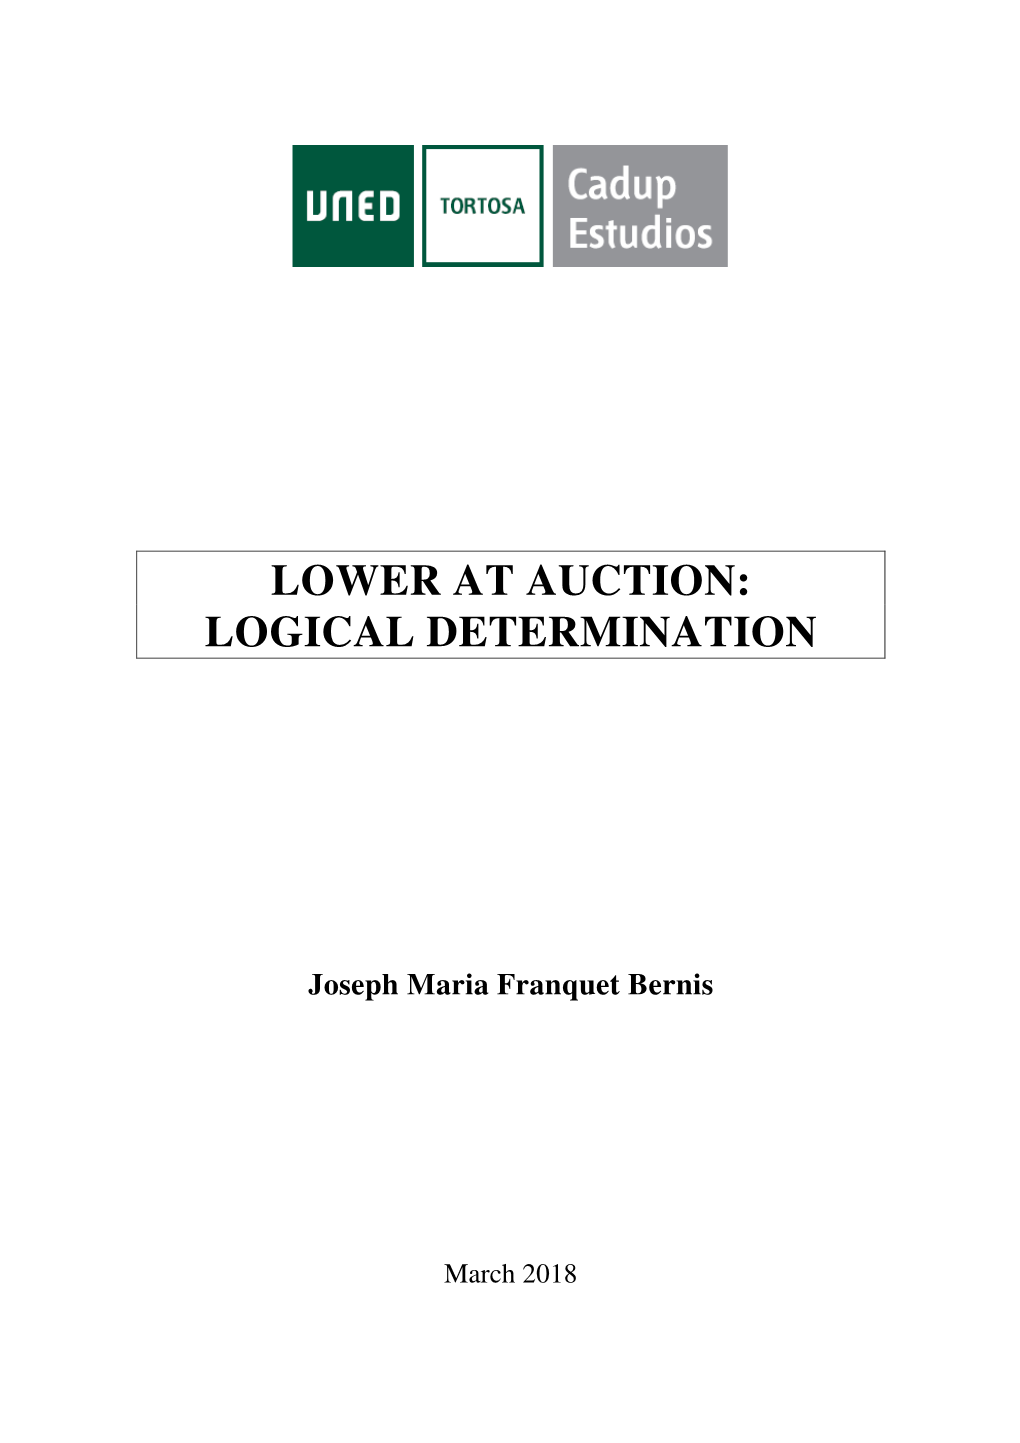 Lower at Auction: Logical Determination